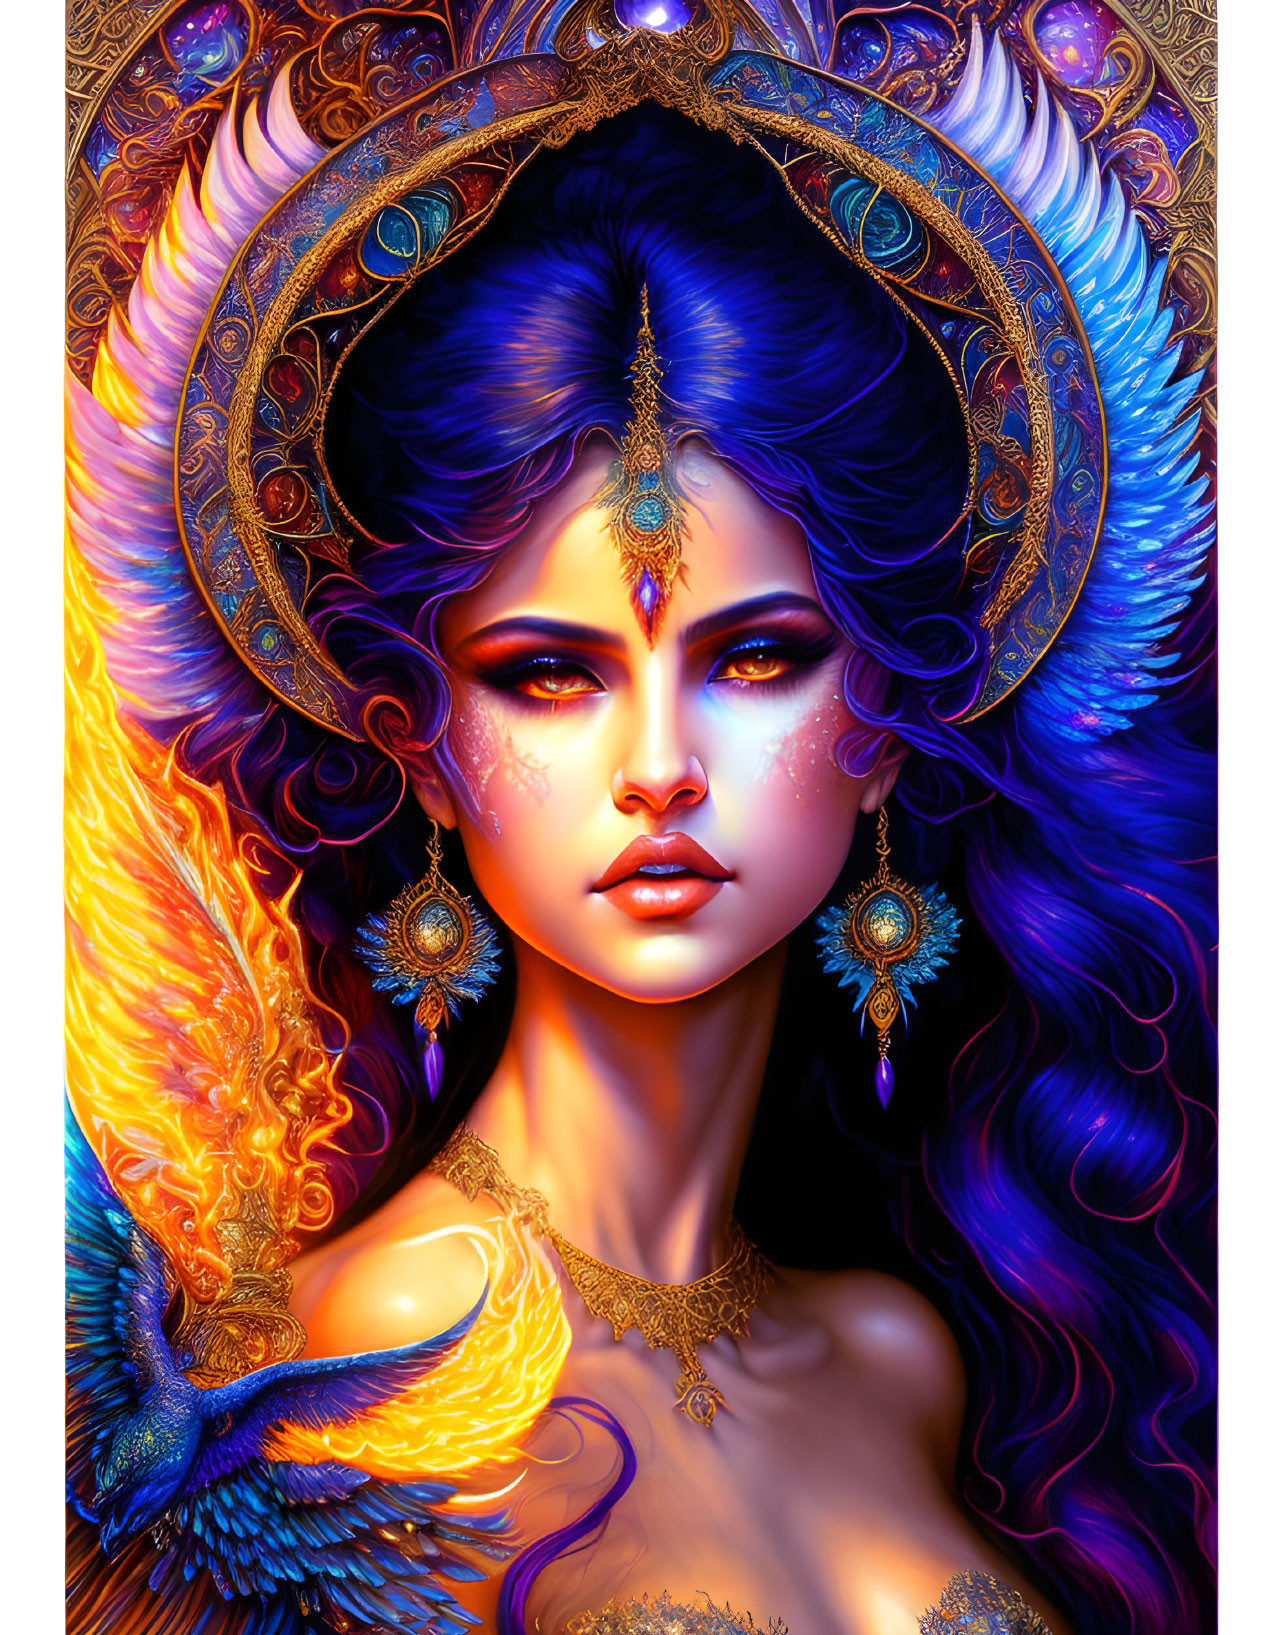 Colorful portrait of a woman with blue hair and phoenix motif headdress.